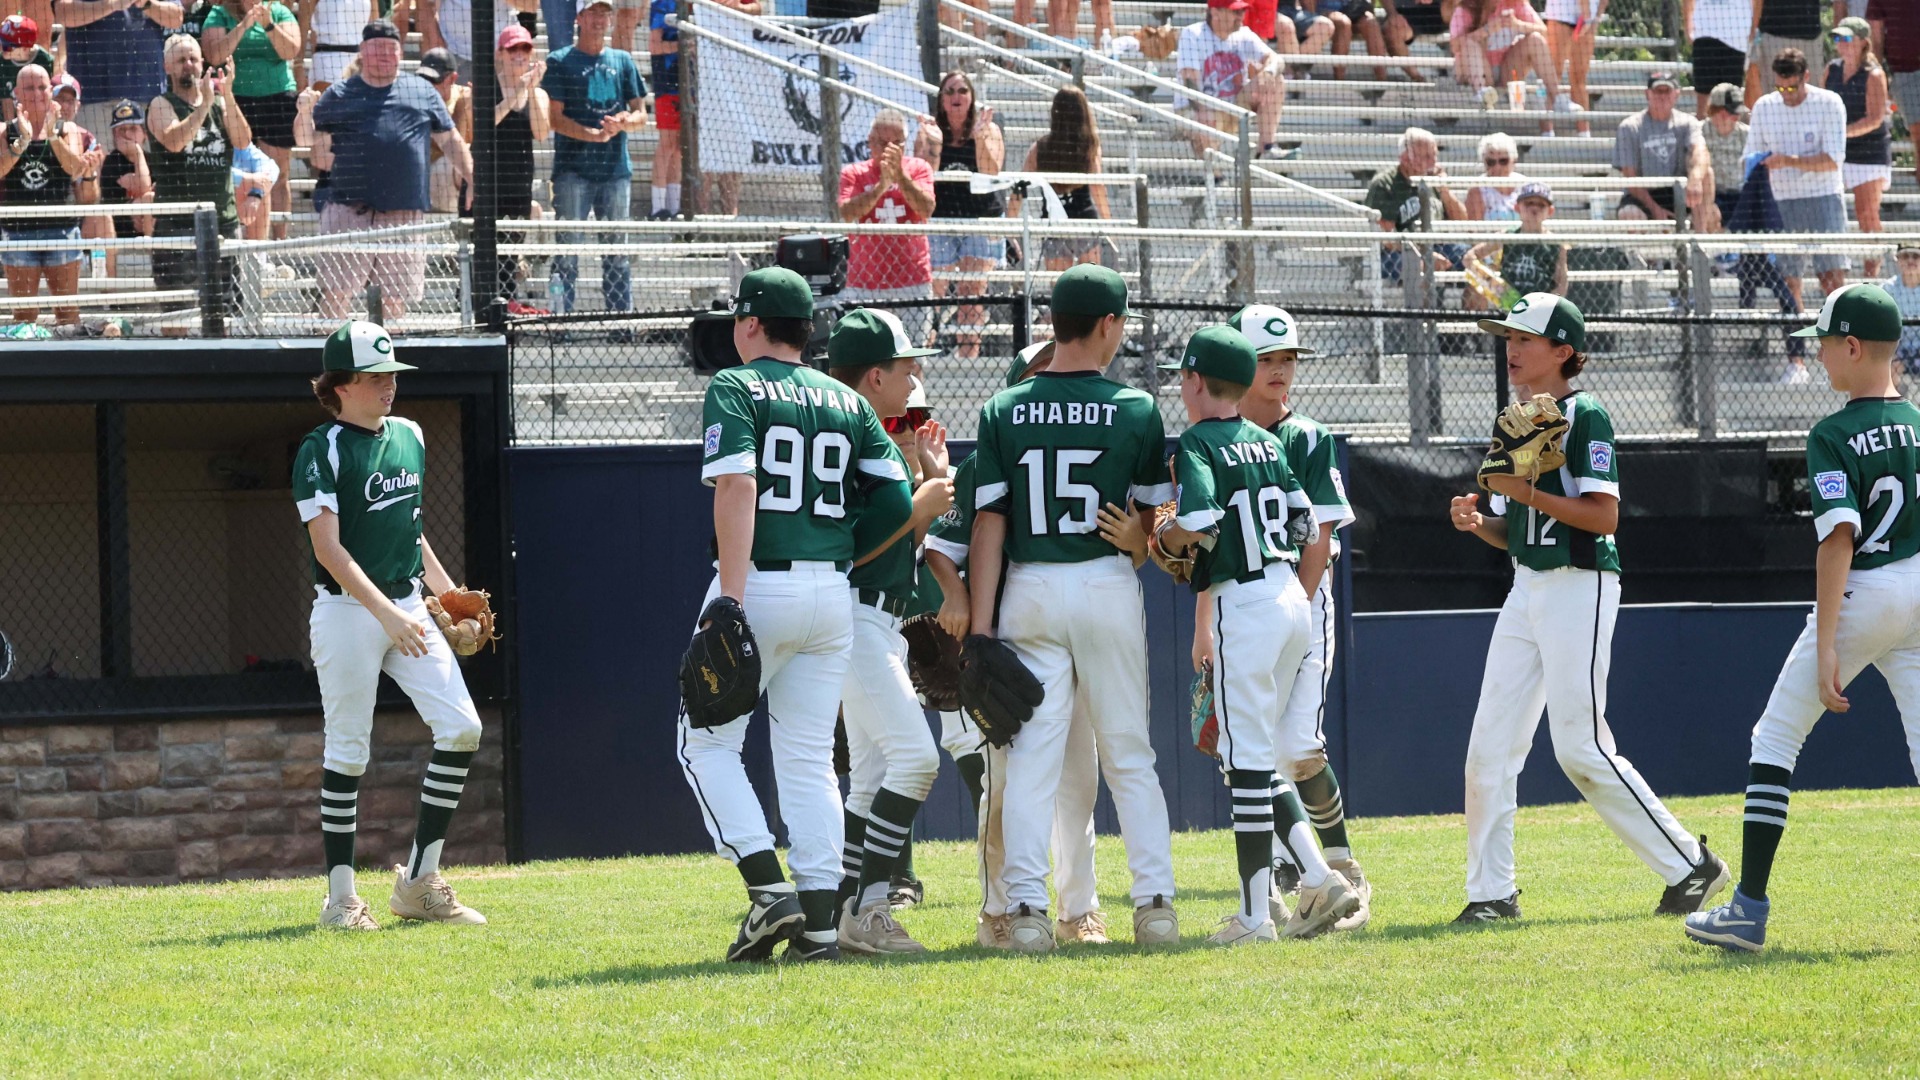 Massachusetts Team To Compete For Spot In Little League World Series